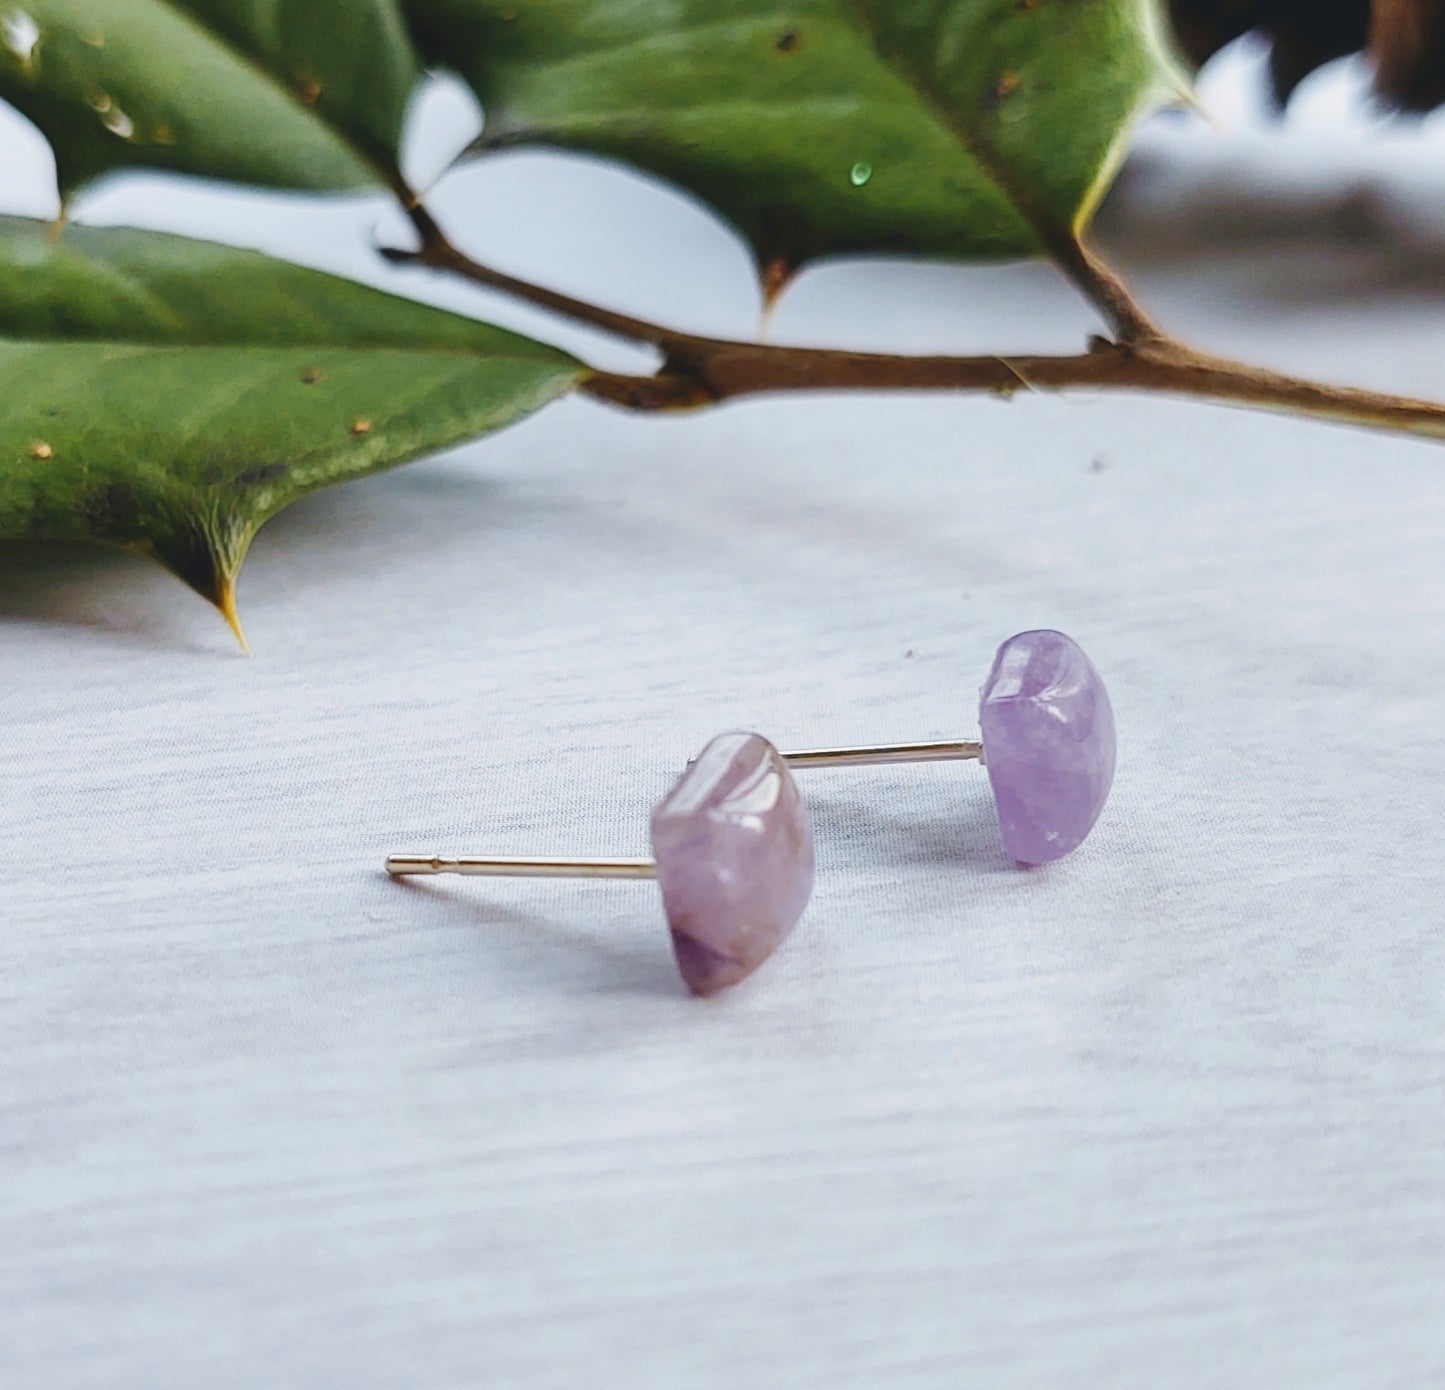 For Small Delights: Amethyst earrings